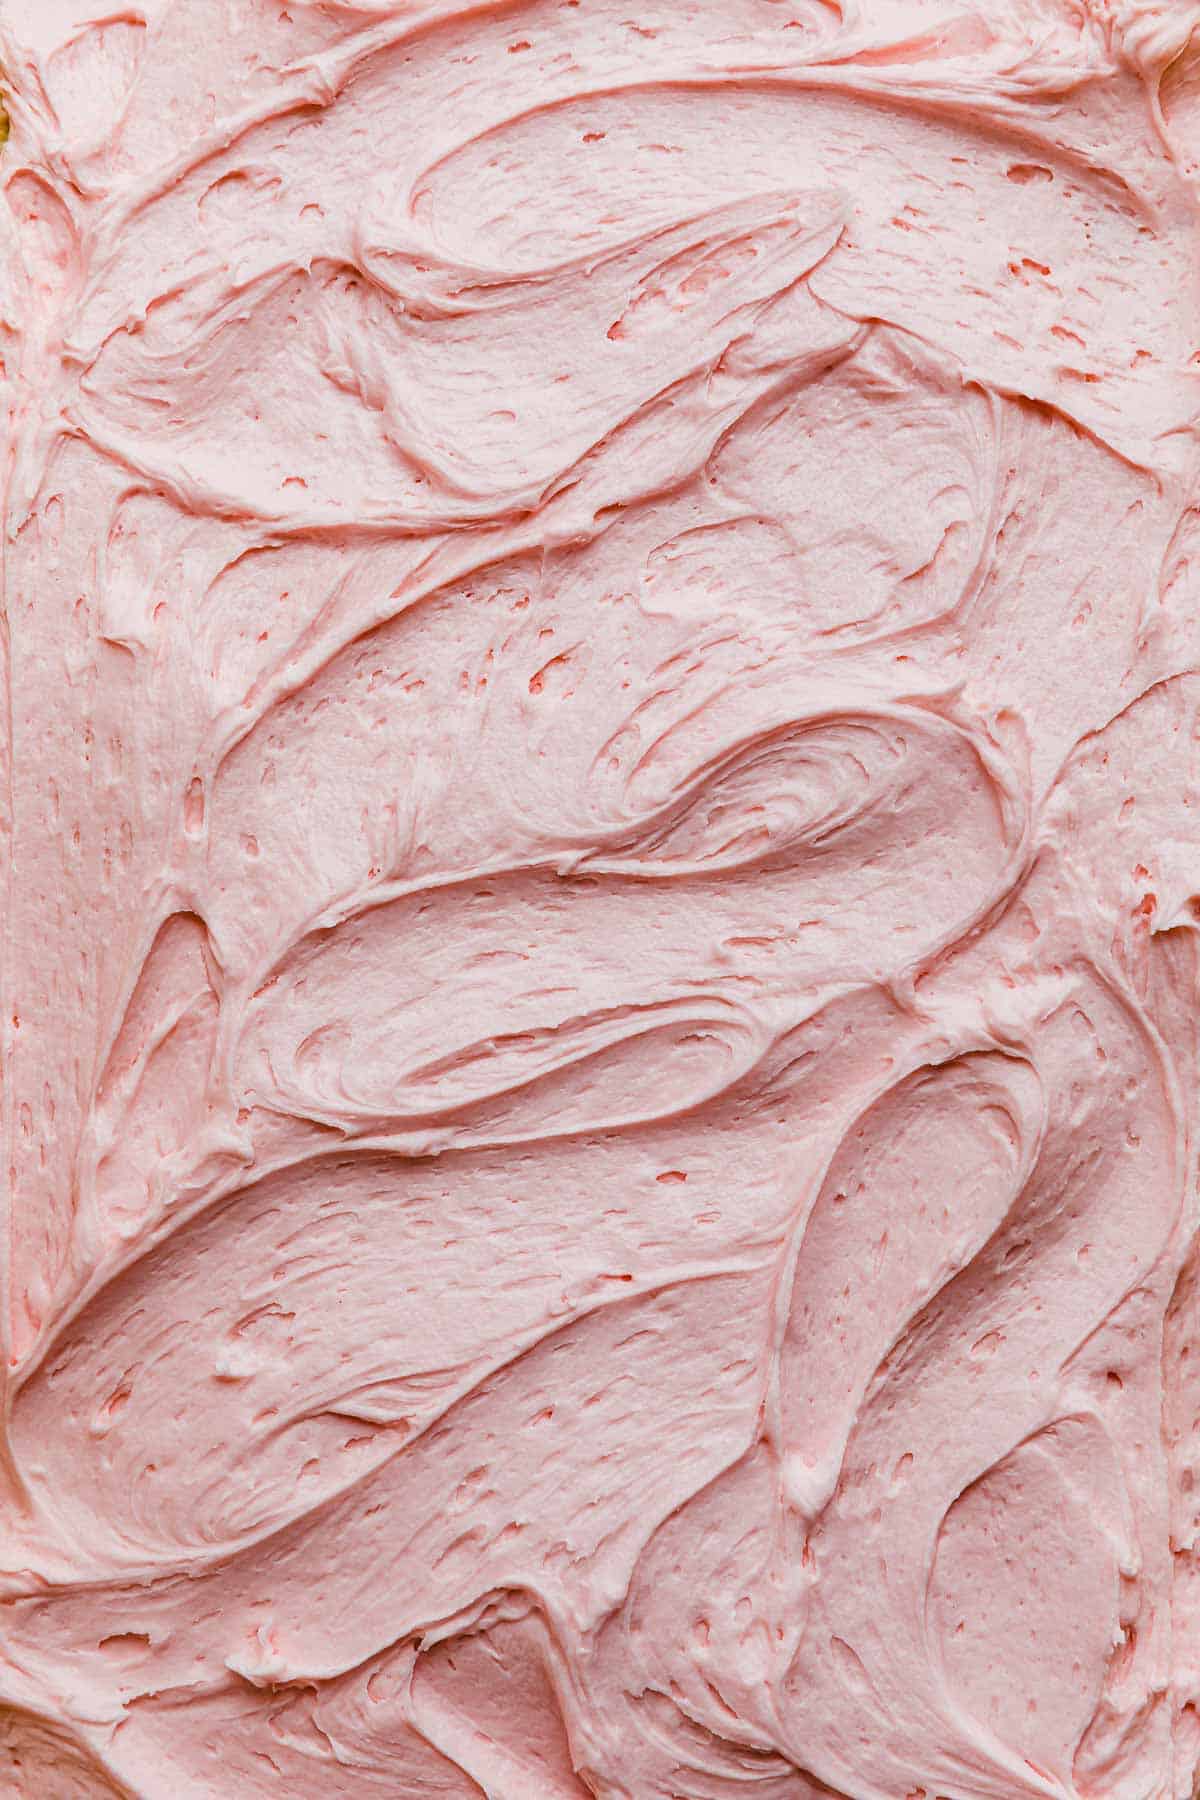 Swirled pink Buttercream Frosting for Sugar Cookies.